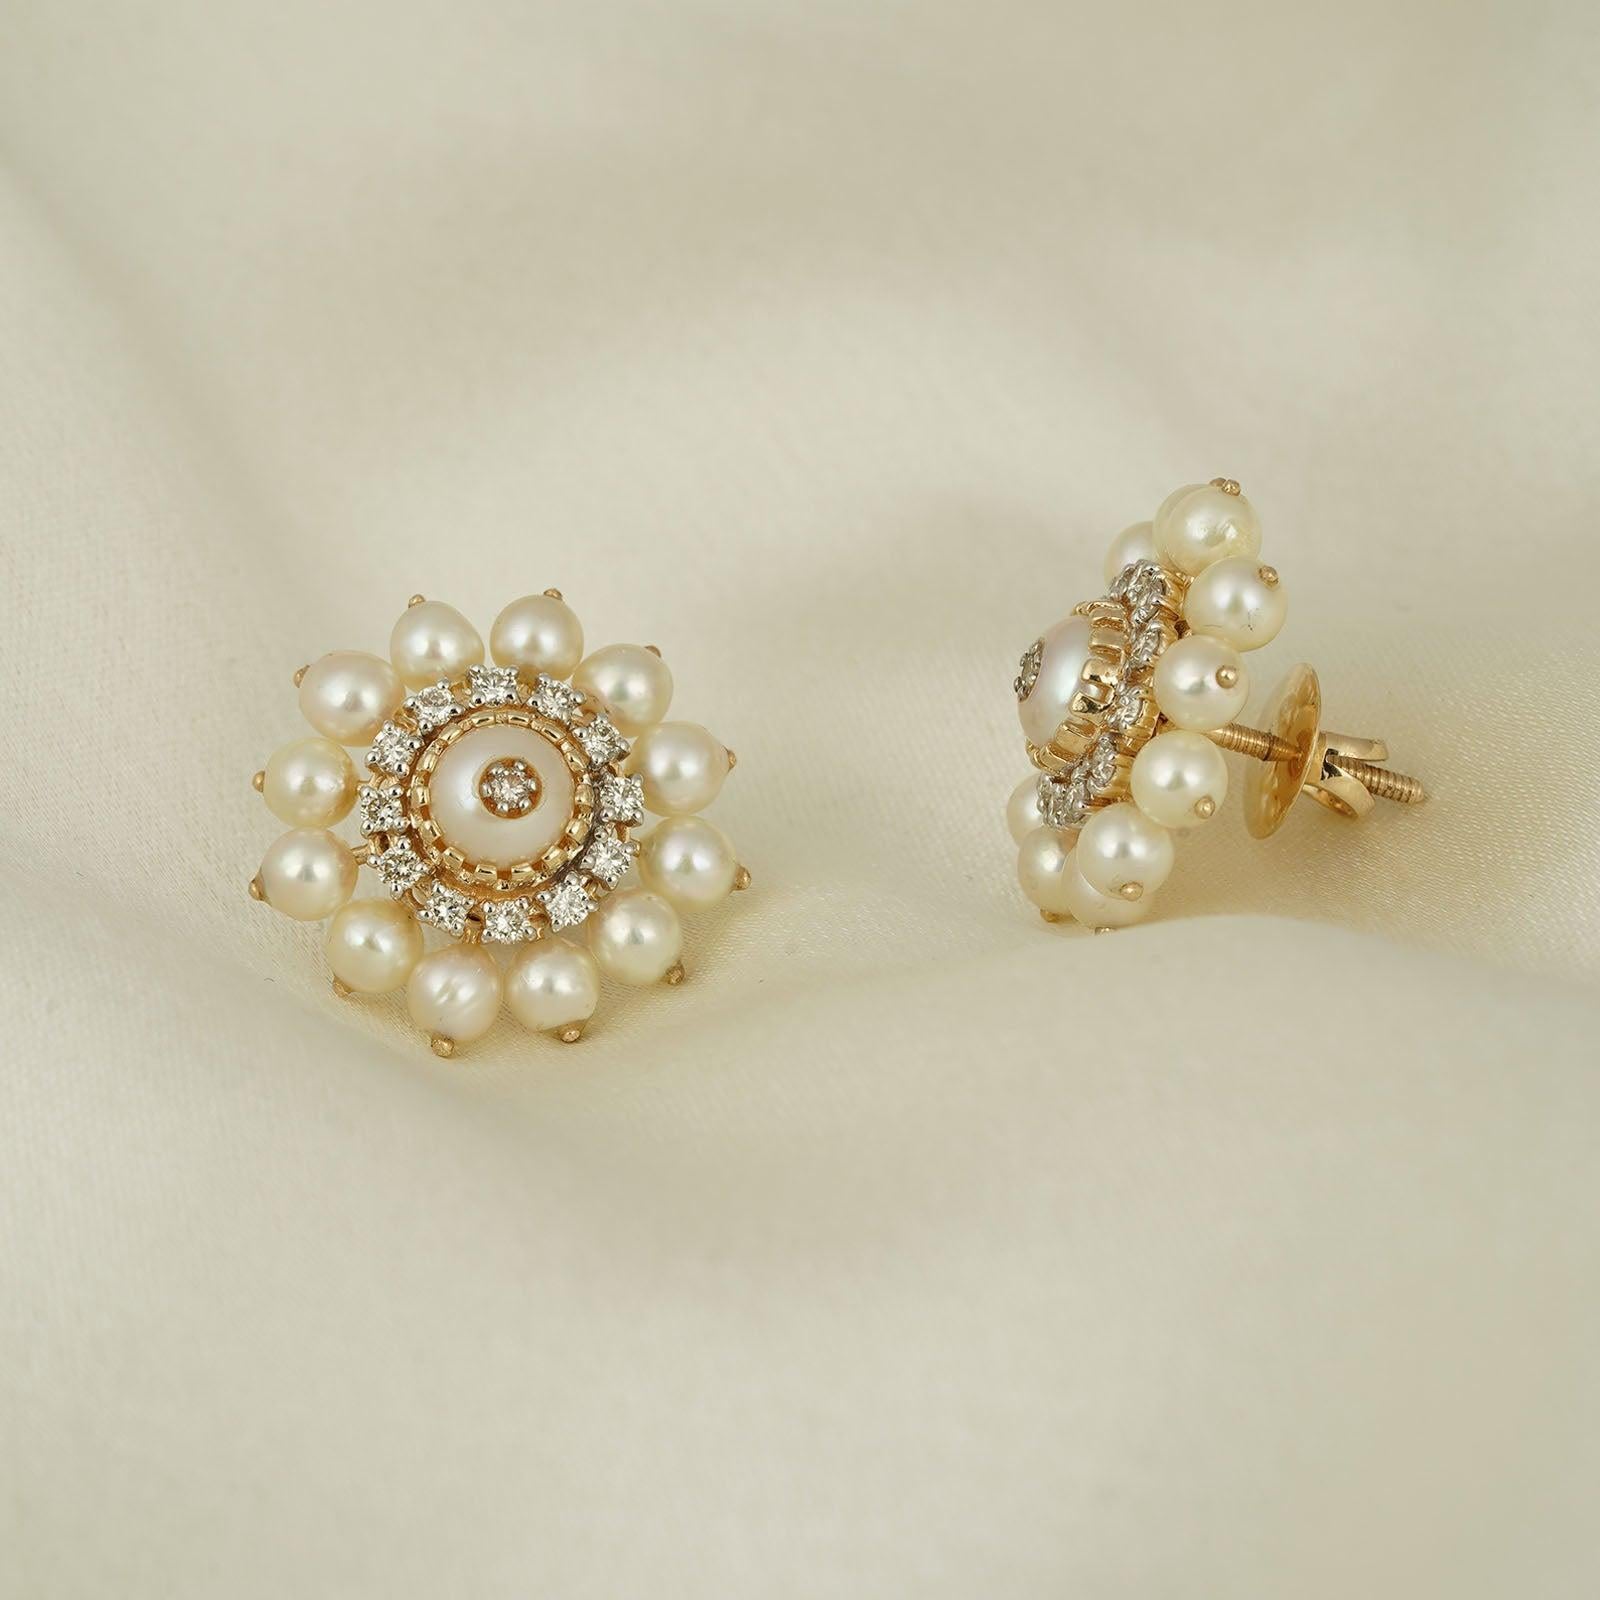 Gold(14K) : 6.70g
Brilliant cut Diamonds : (VS clarity & H-I colour) : 0.55ct
Gemstones : Cultured Pearl

Life is movement! Building on this truth we worked on the concept of movement. These elegant ear studs handcrafted in gold, hold a diamond